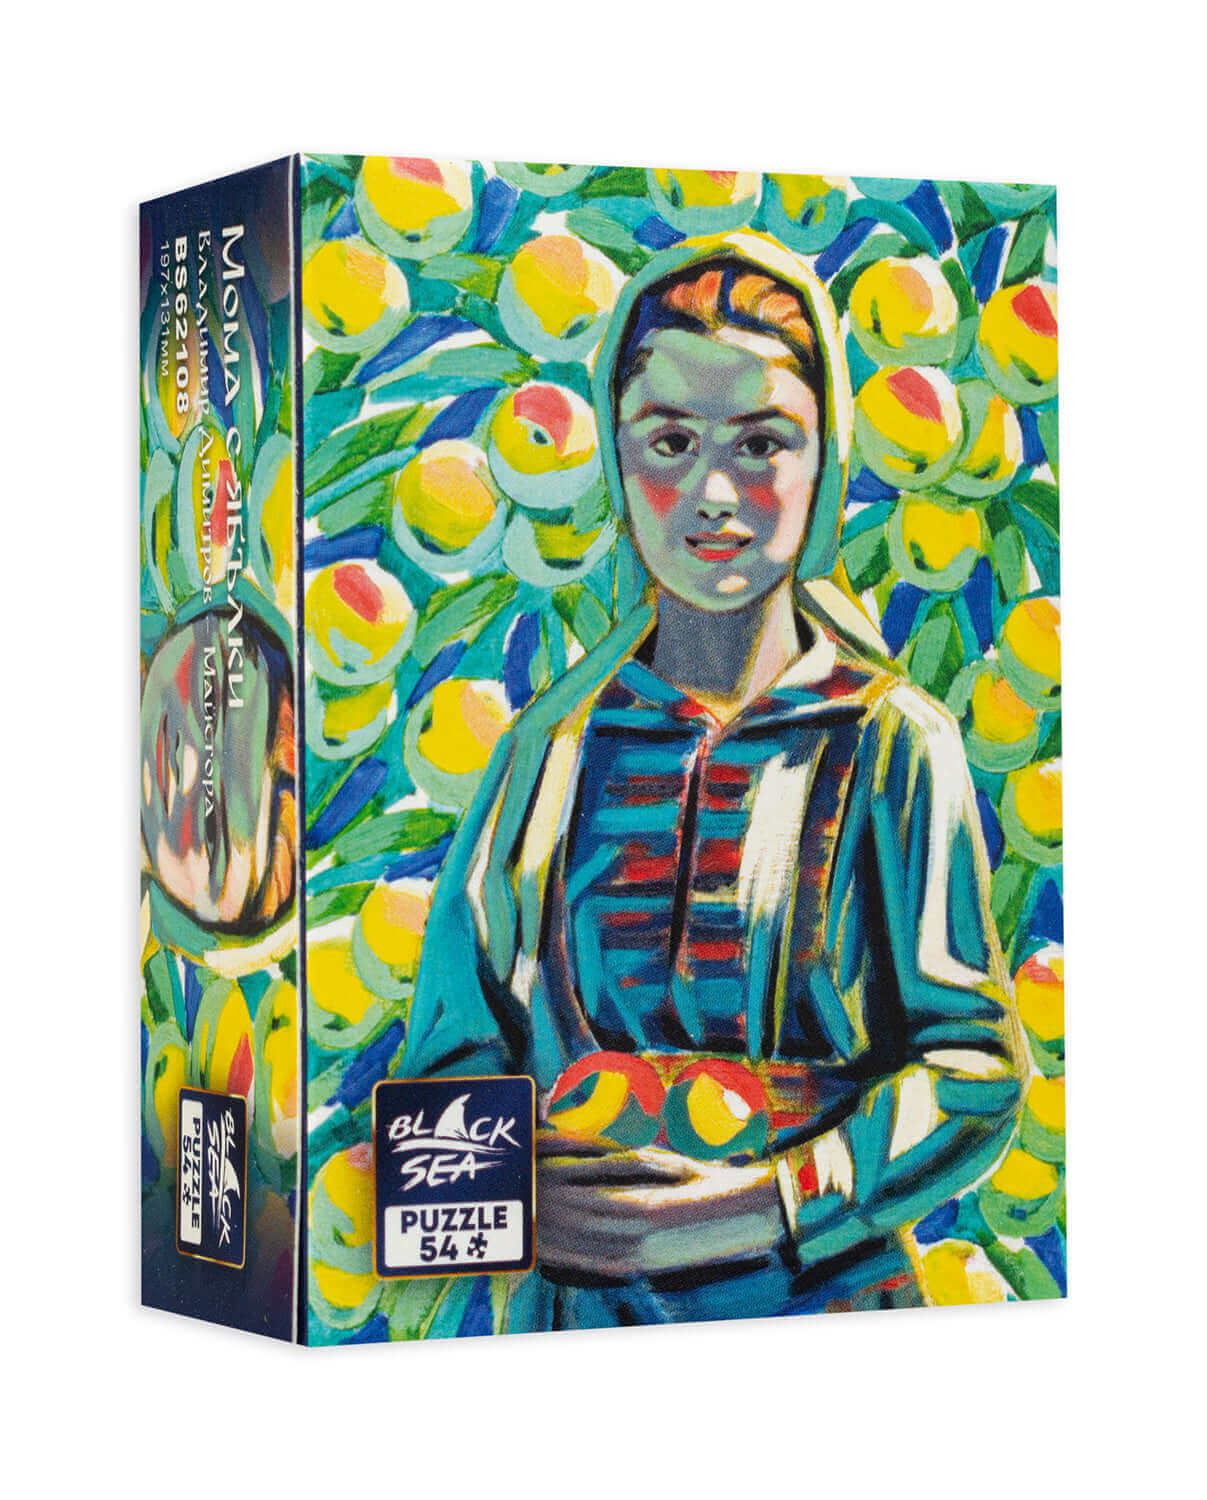 Mini puzzle Black sea 54 pieces - Maiden with Apples, A Maiden with Apples, one of Vladimir Dimitrov 'Maystora's most famous paintings, is a great example of his bright, distinctive individual style. The figure of the young maiden on the verge of womanhoo